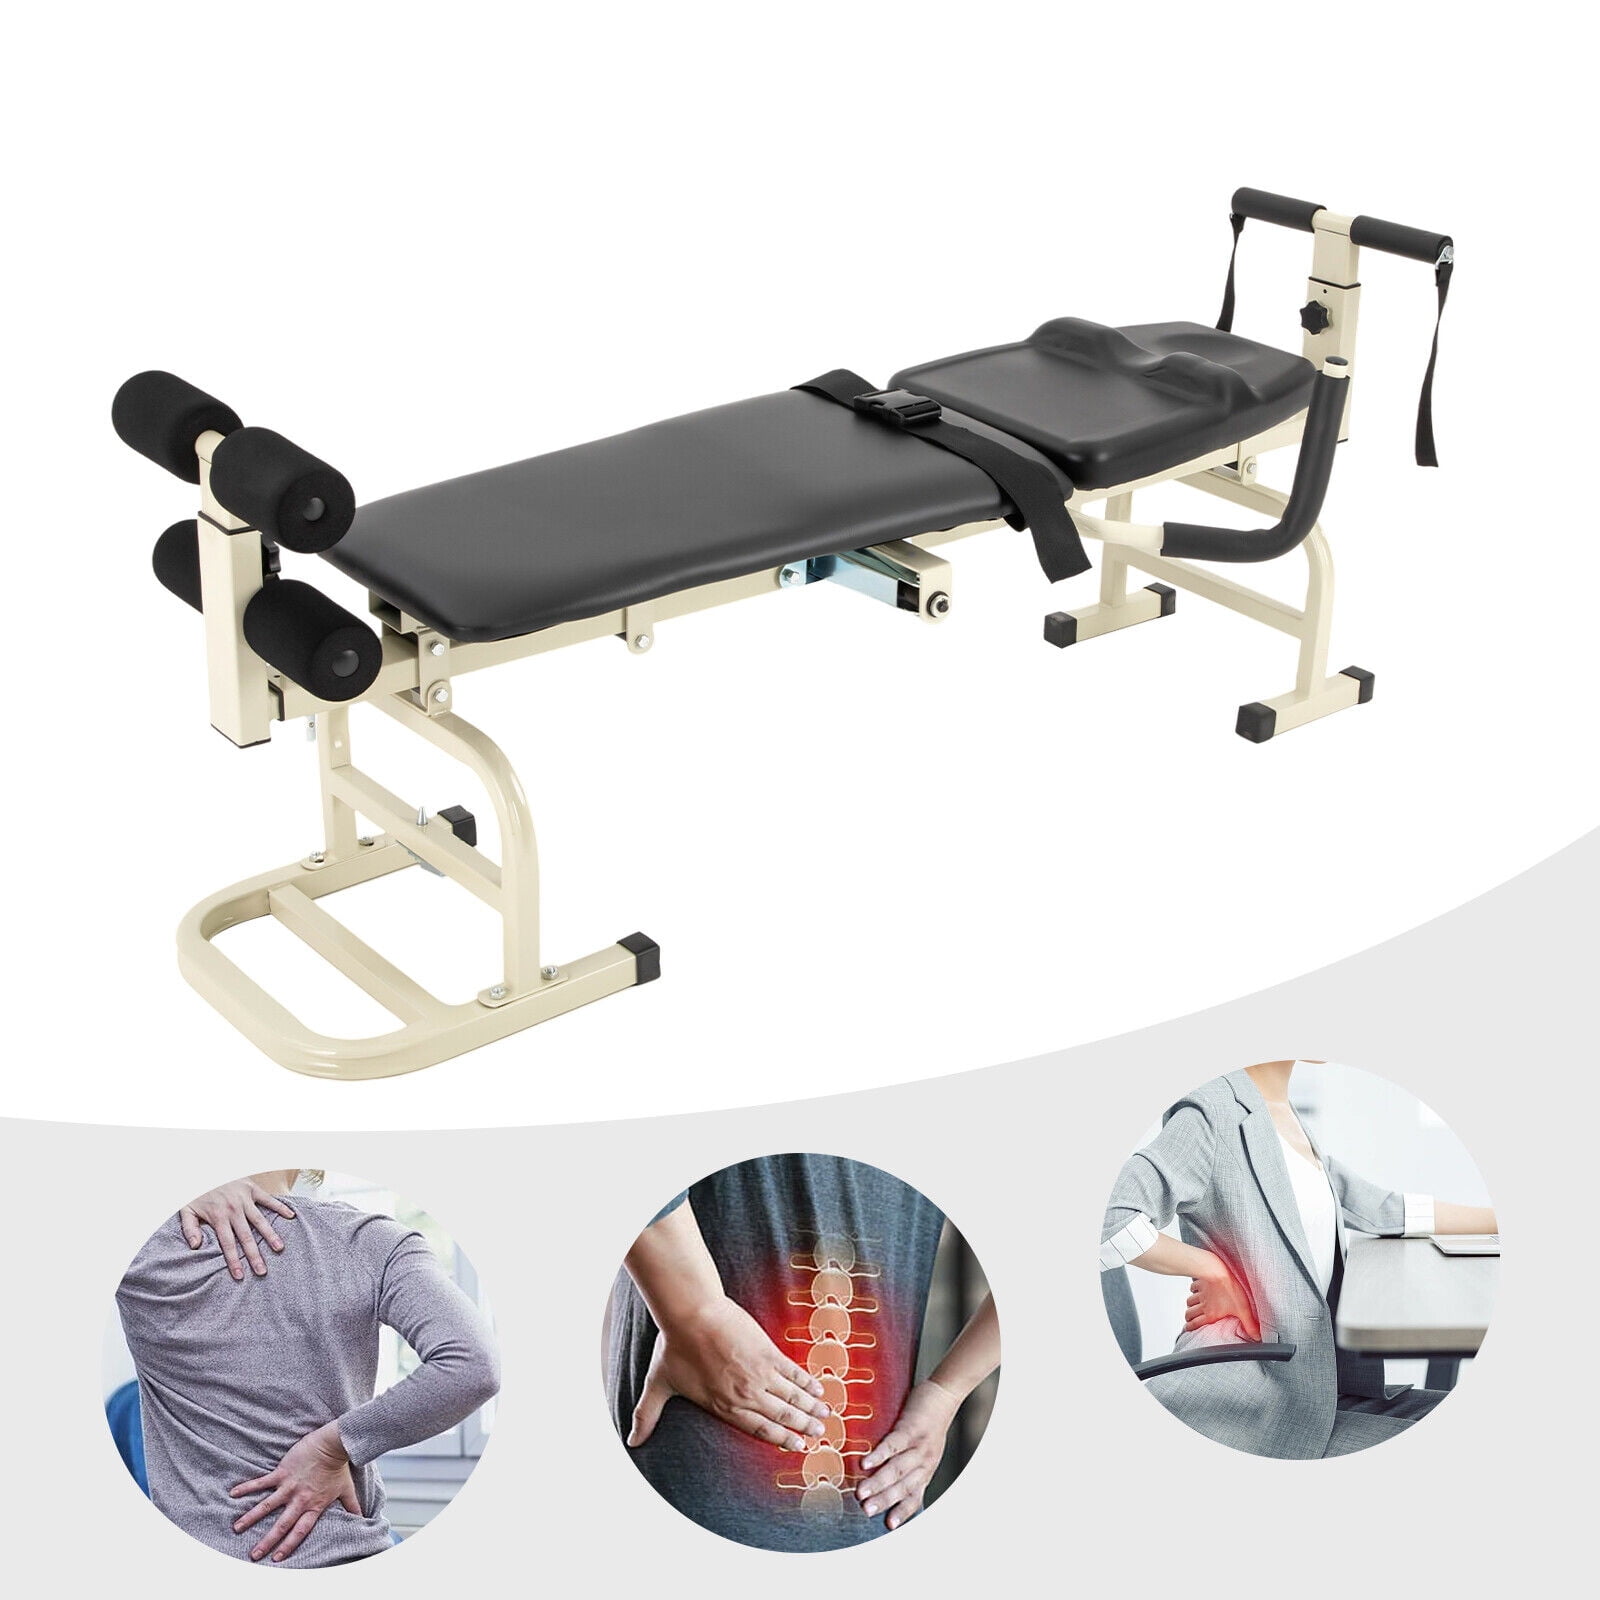 Lumbar Traction Bed Supplier  Recovery Treatment Supplier